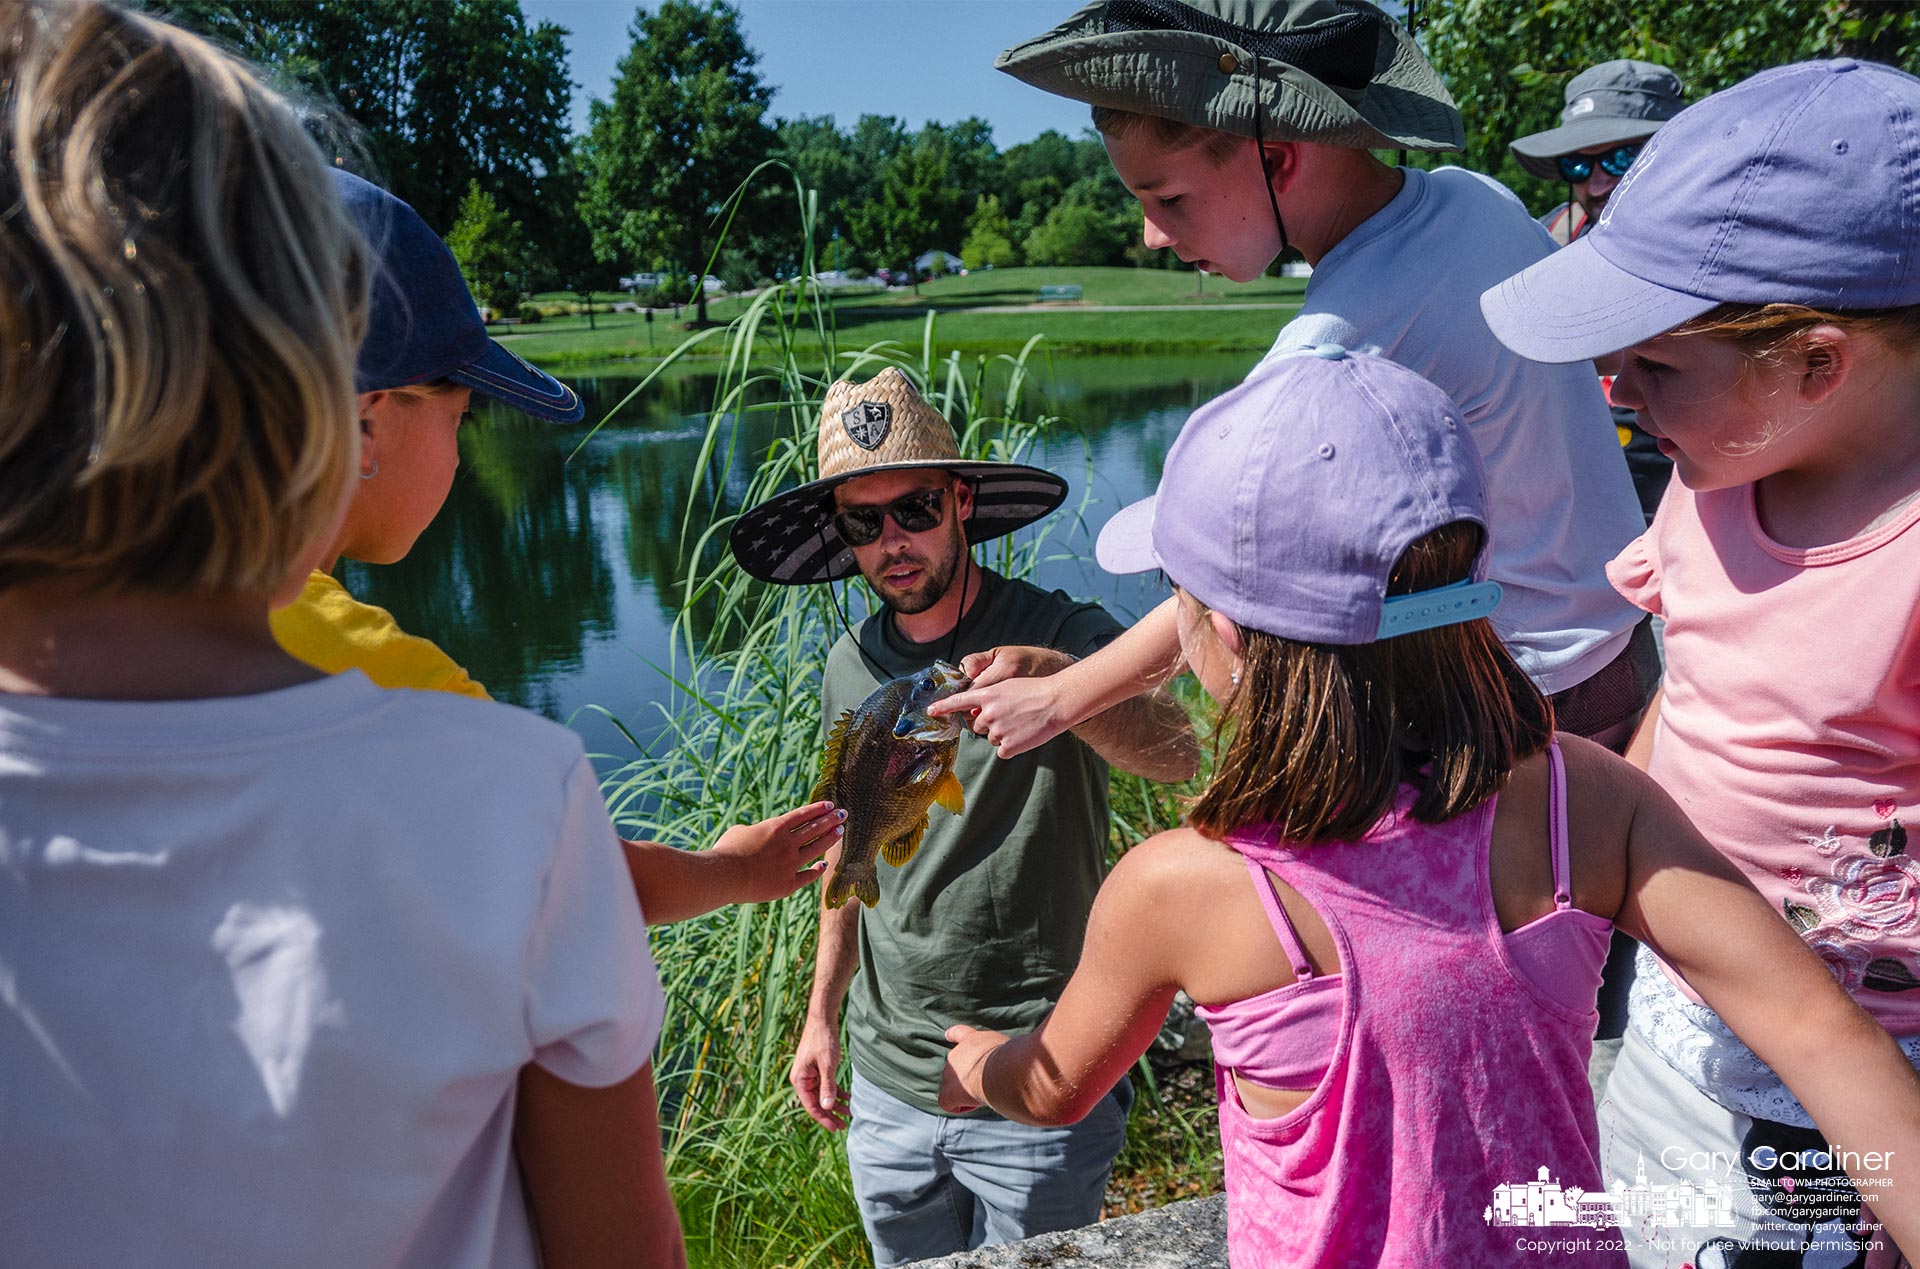 A group of young anglers reaches to touch a bluegill pulled by one of them from the pond at Heritage Park Saturday afternoon. My Final Photo for July 23, 2022.